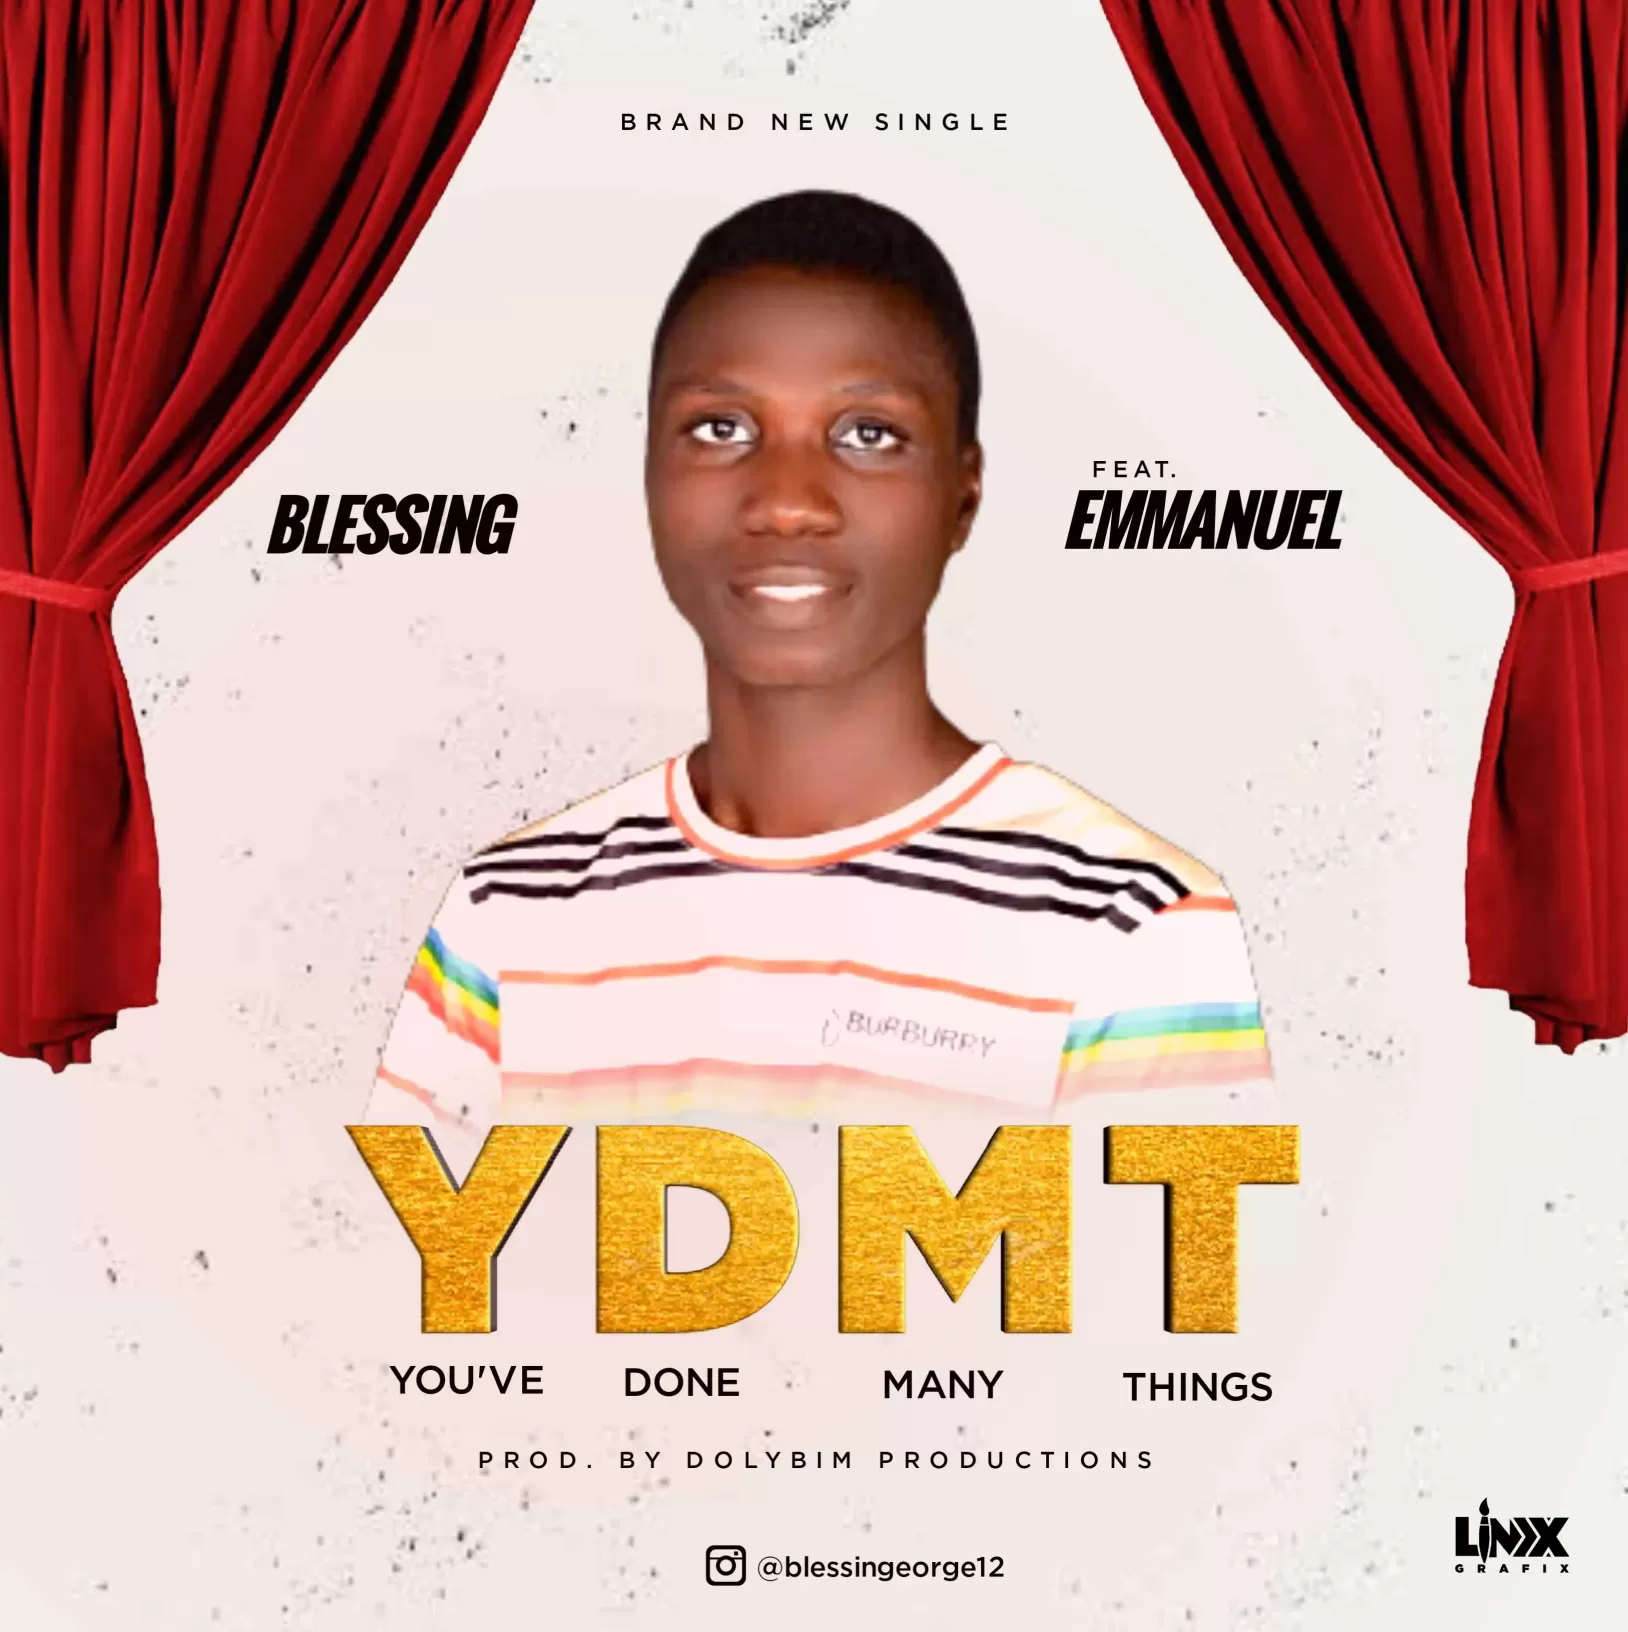 You have done many thing by blessing ft Emmanuel